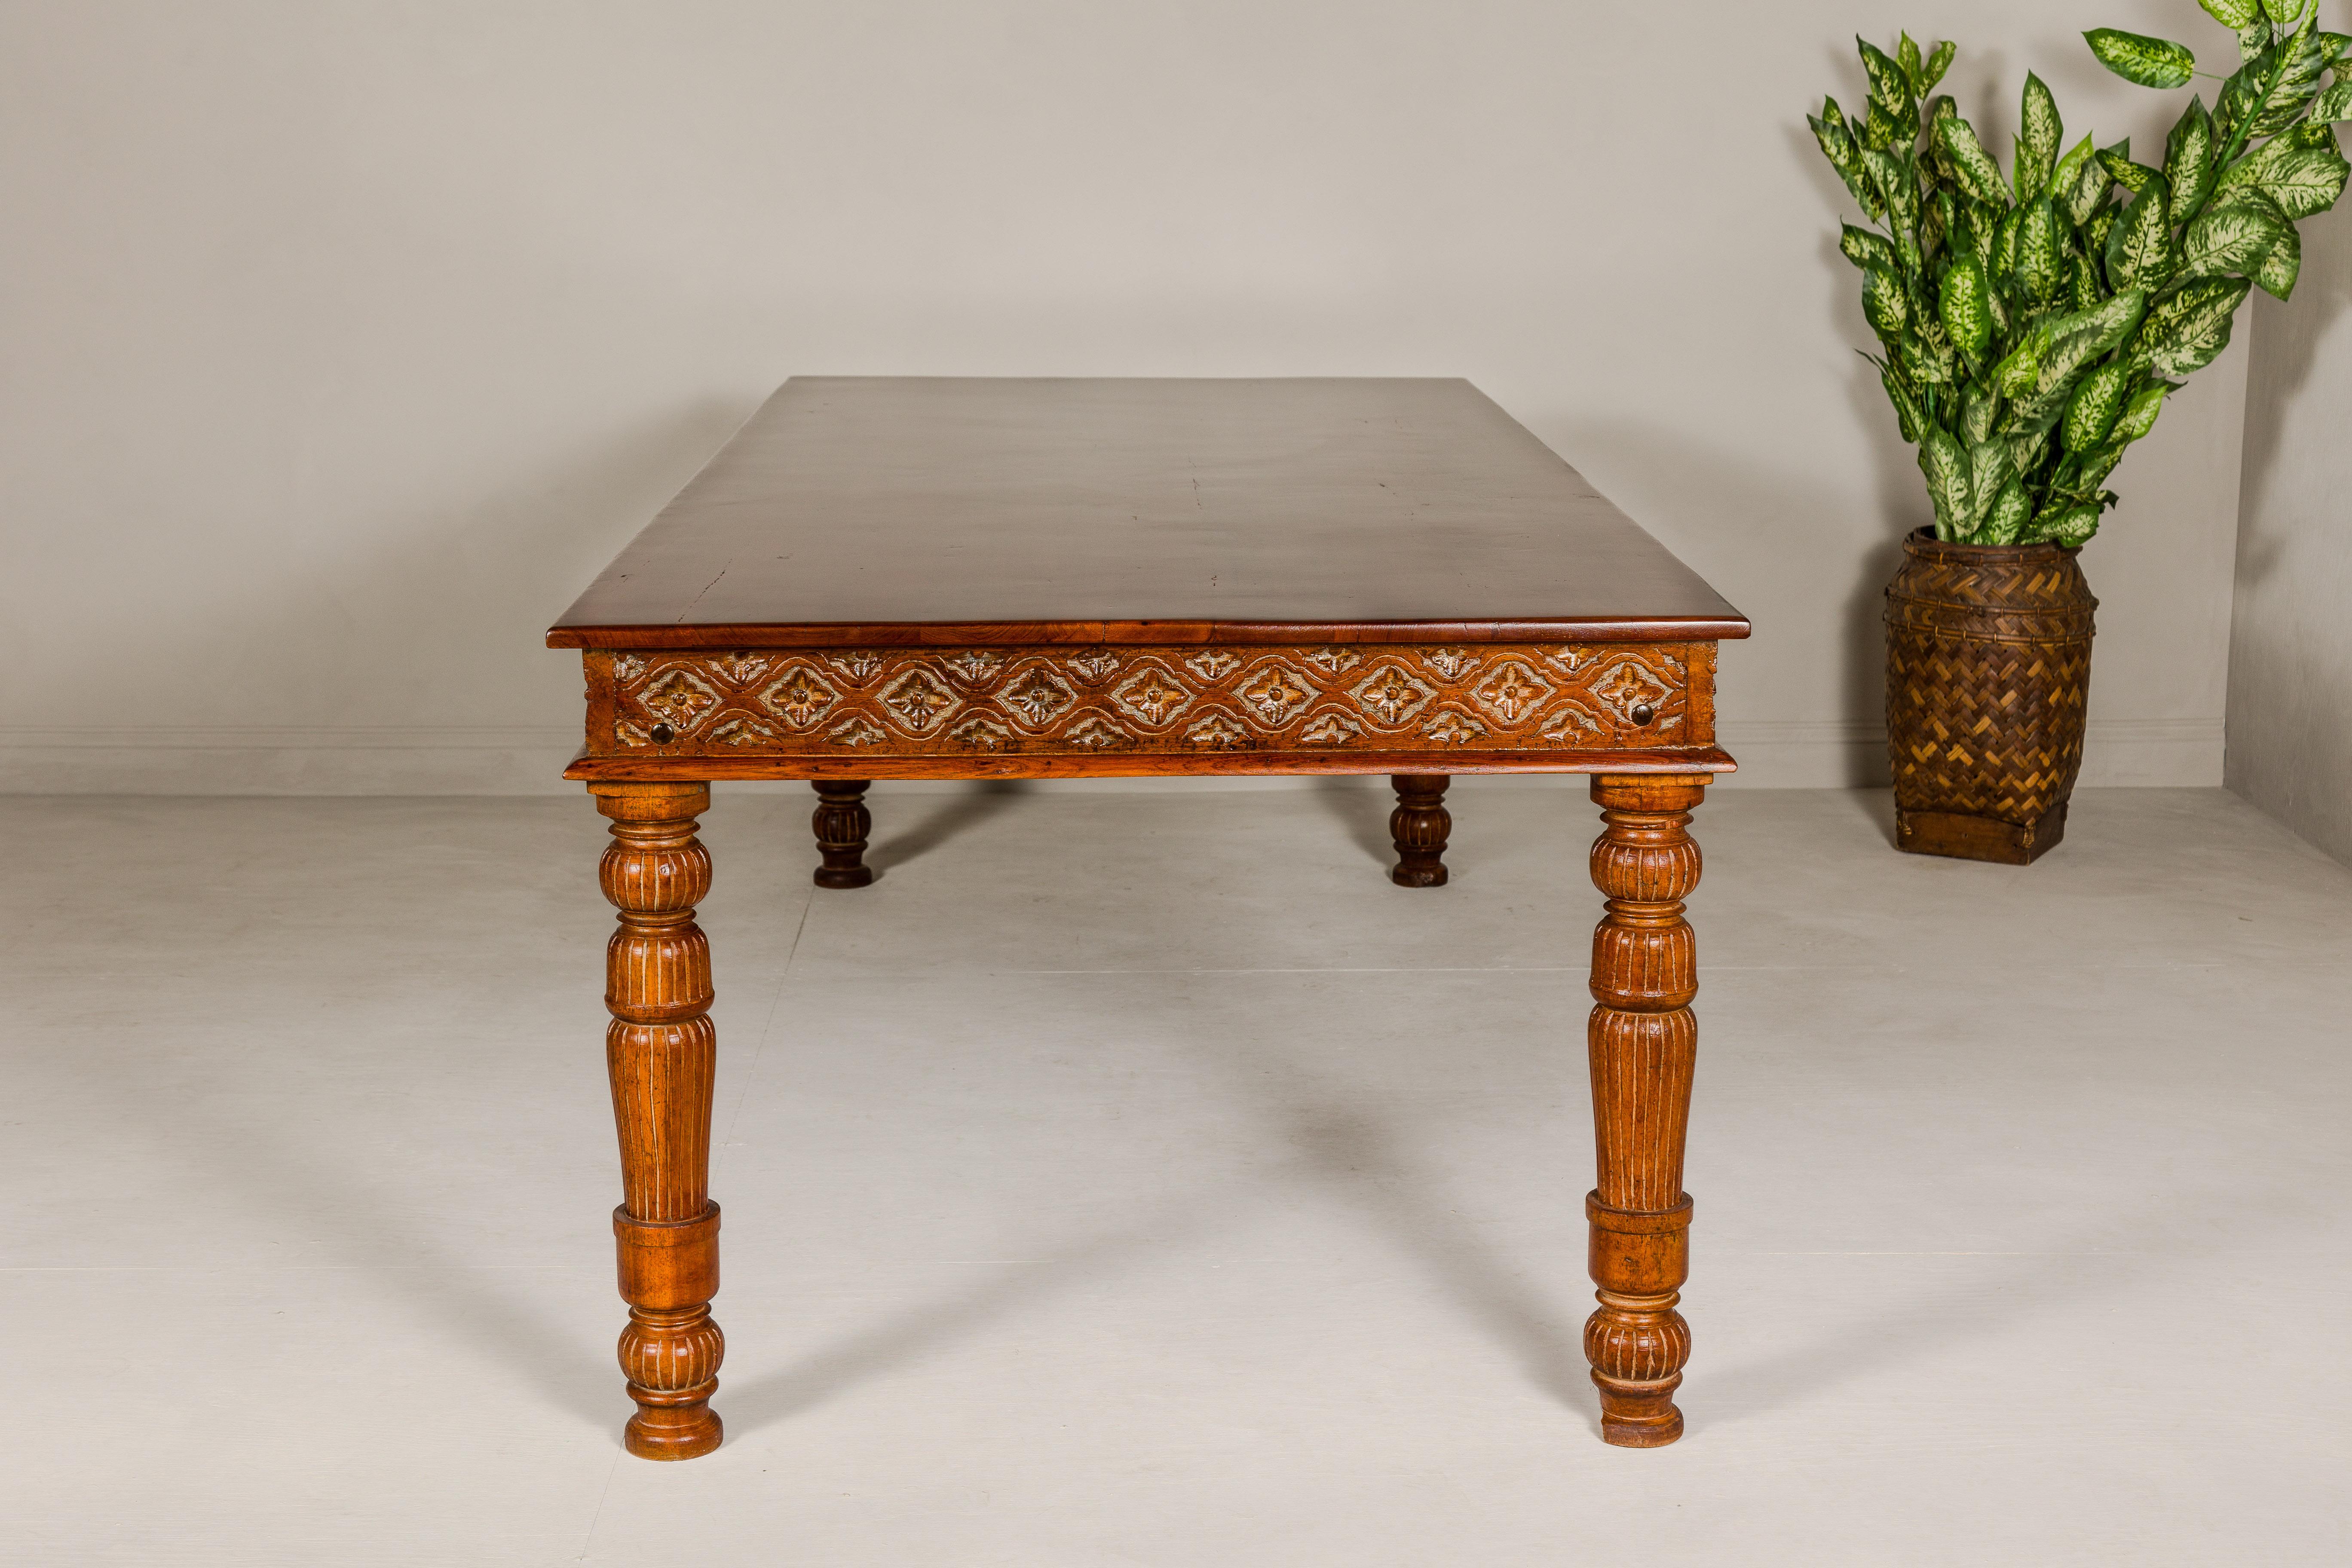 Large Dining Room Table with Carved Apron, Floral Motifs and Turned Legs For Sale 8